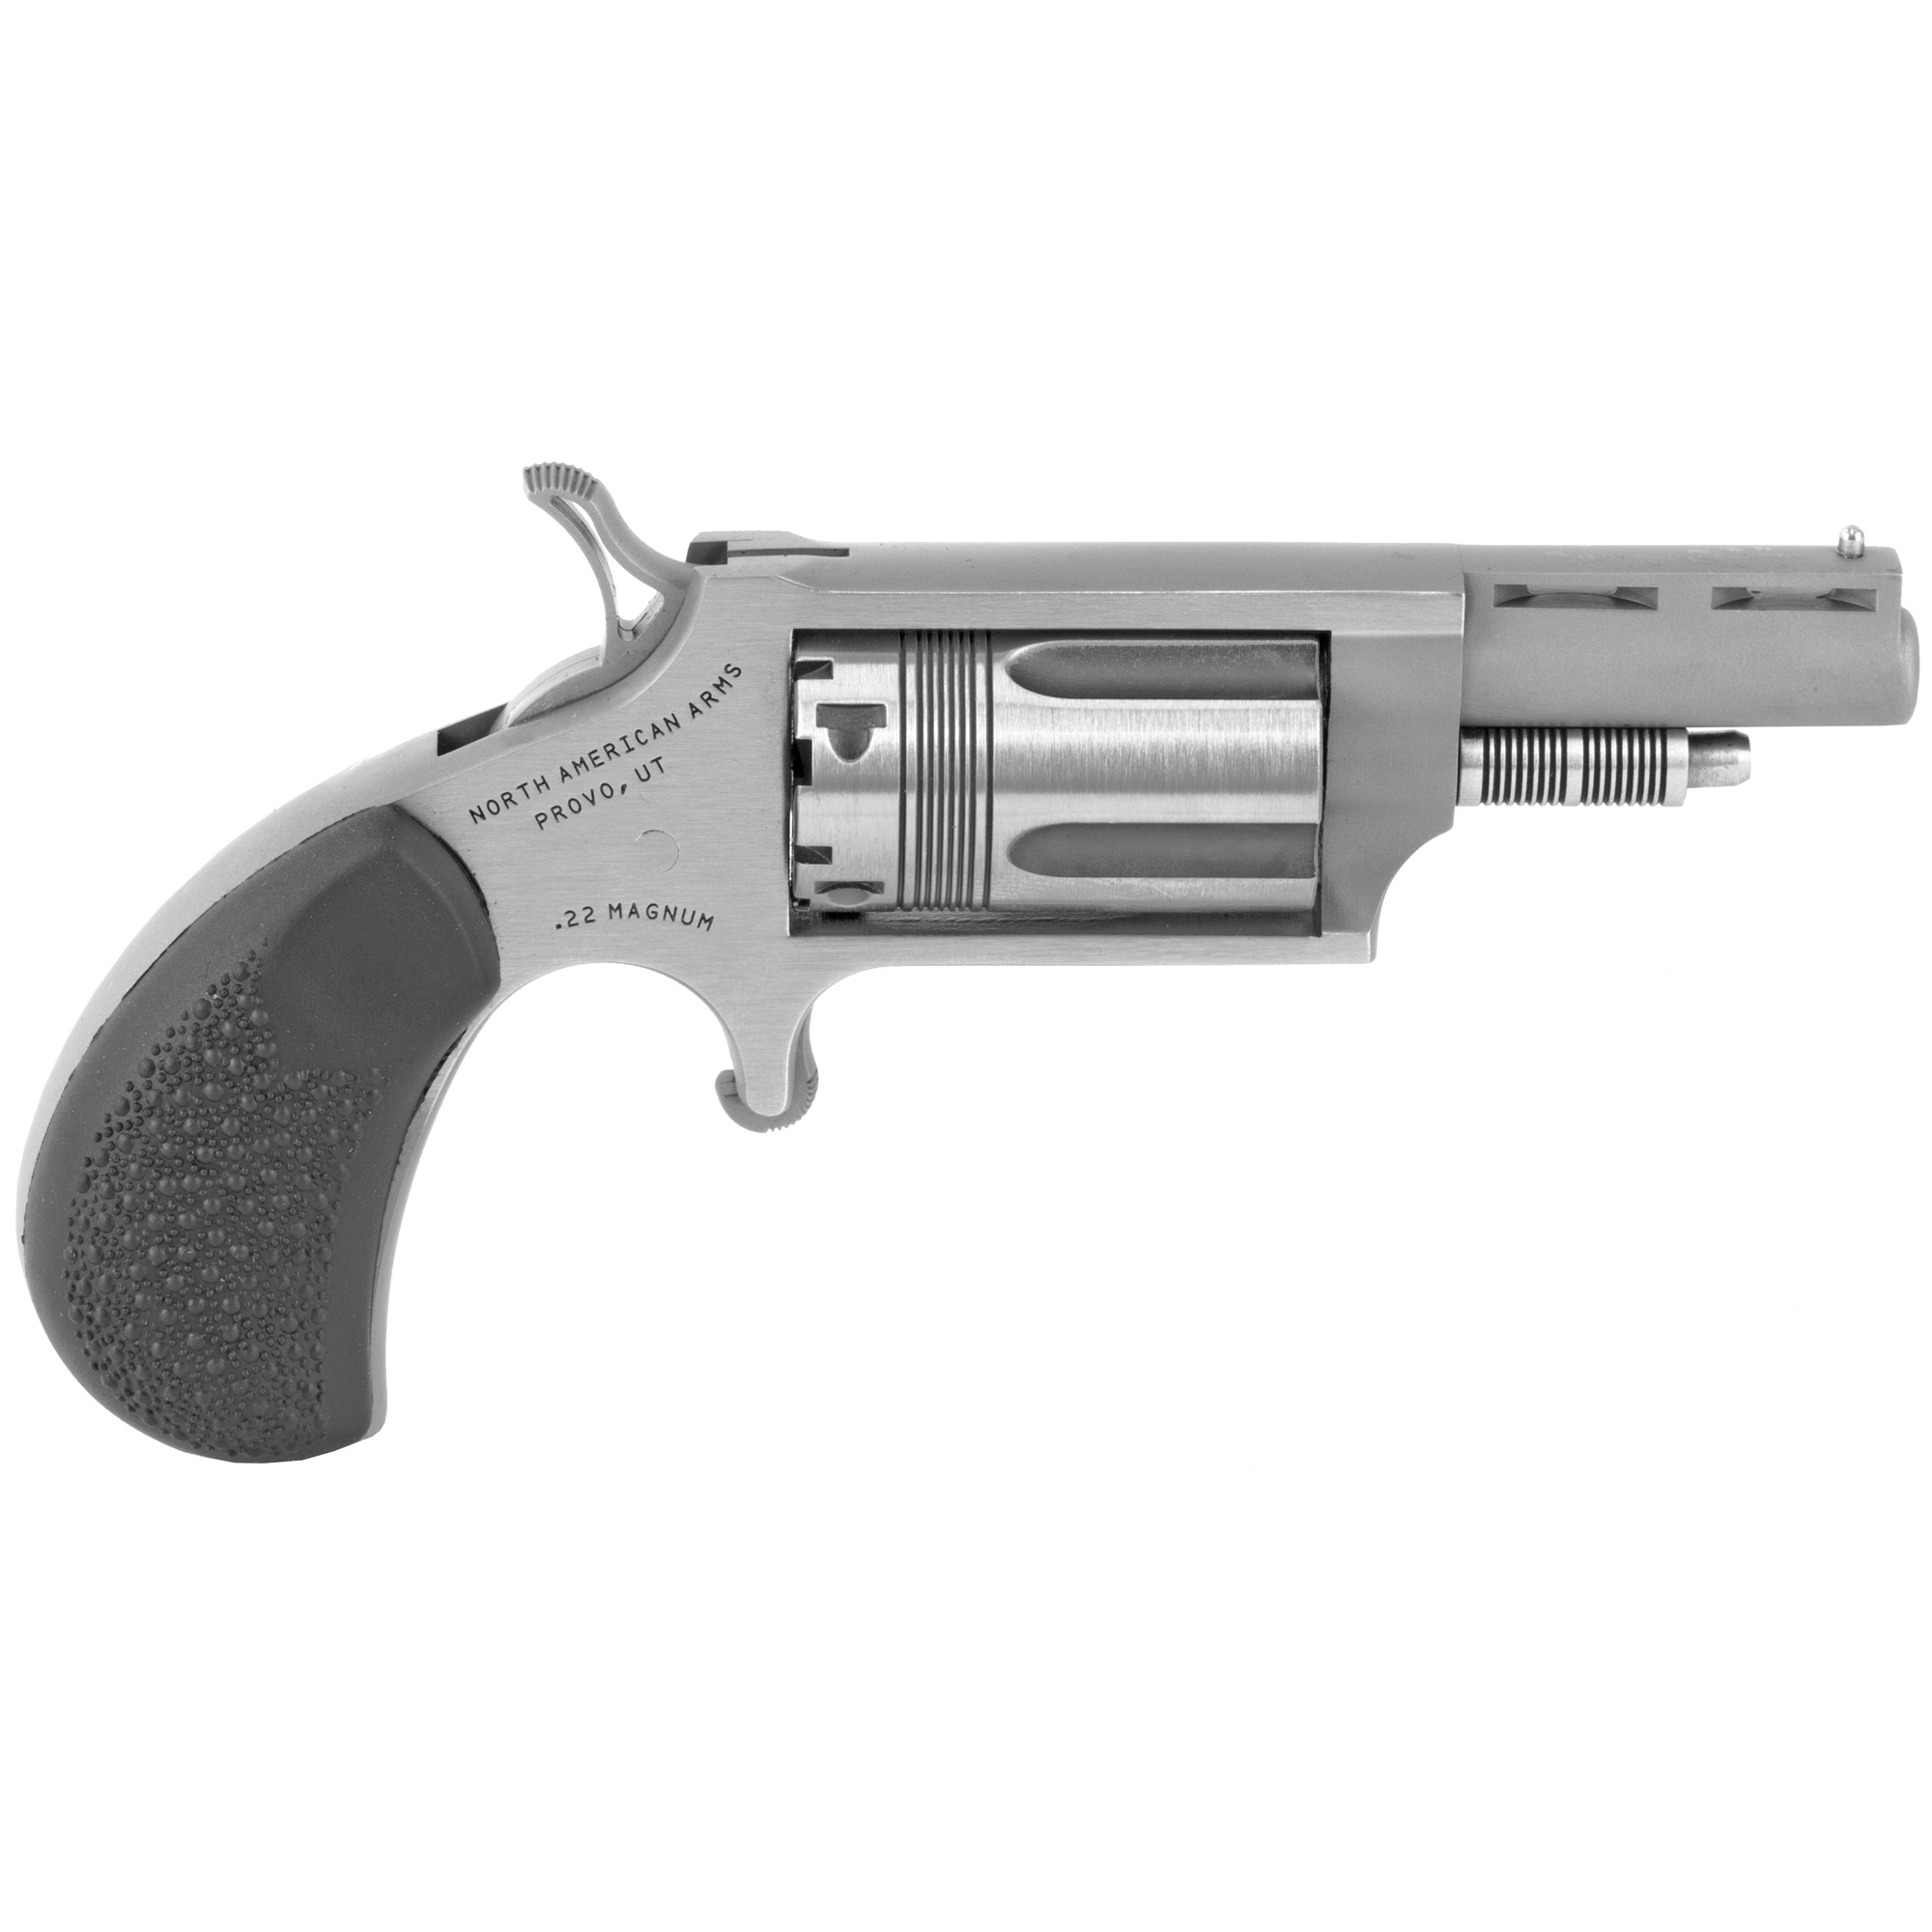 North American Arms, The Wasp, Single Action, Revolver, 22 WMR, 1.625" Barrel, Matte Finish, Stainless Steel, Silver, Rubber Grips, Fixed Sights, 5 Rounds